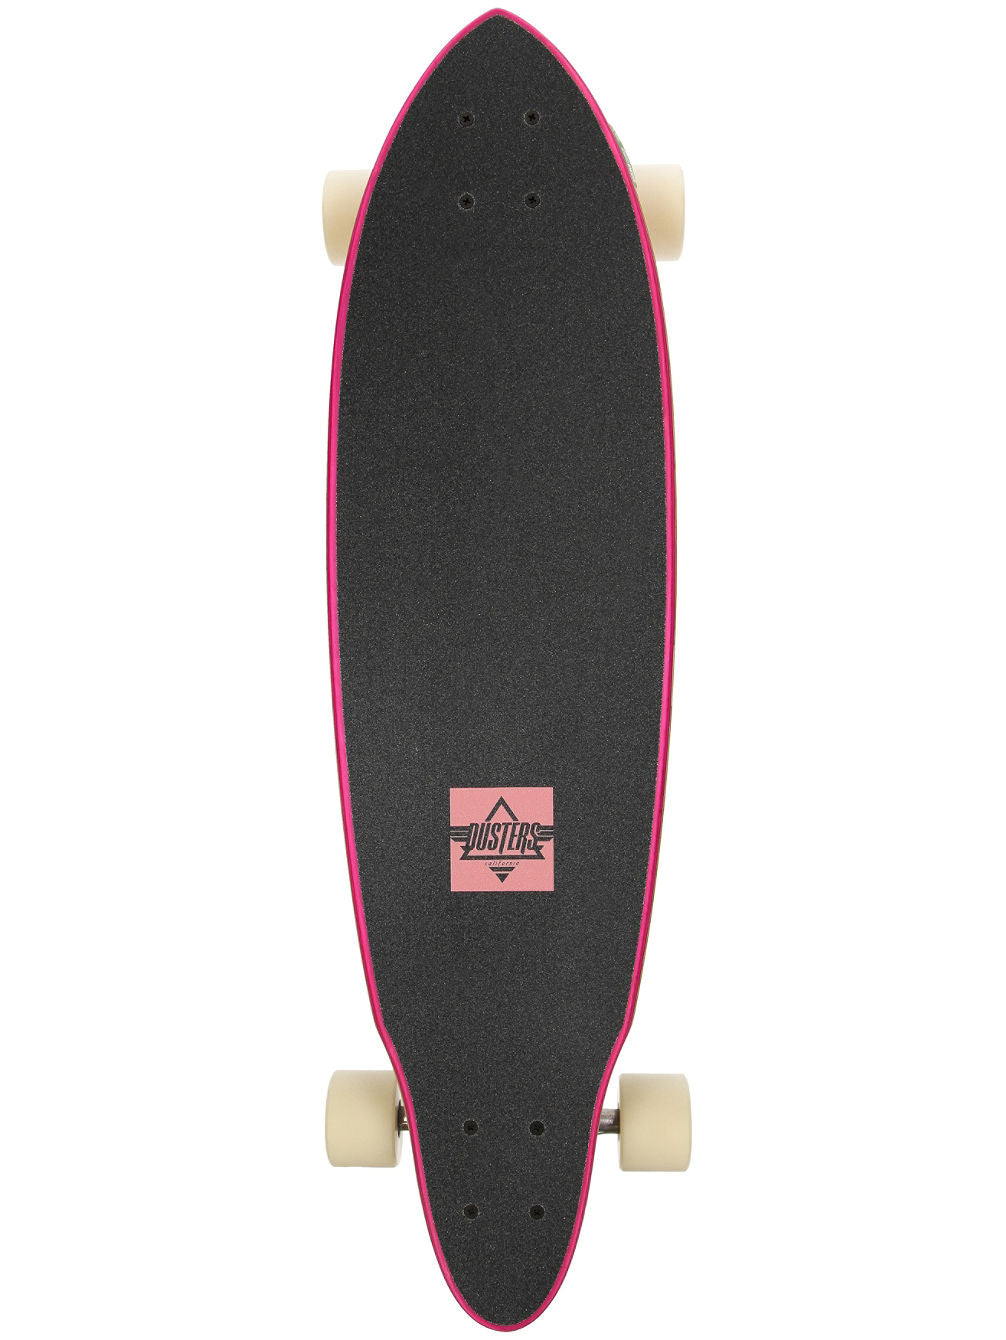 Dusters Culture 33" Pintail Complete Longboard